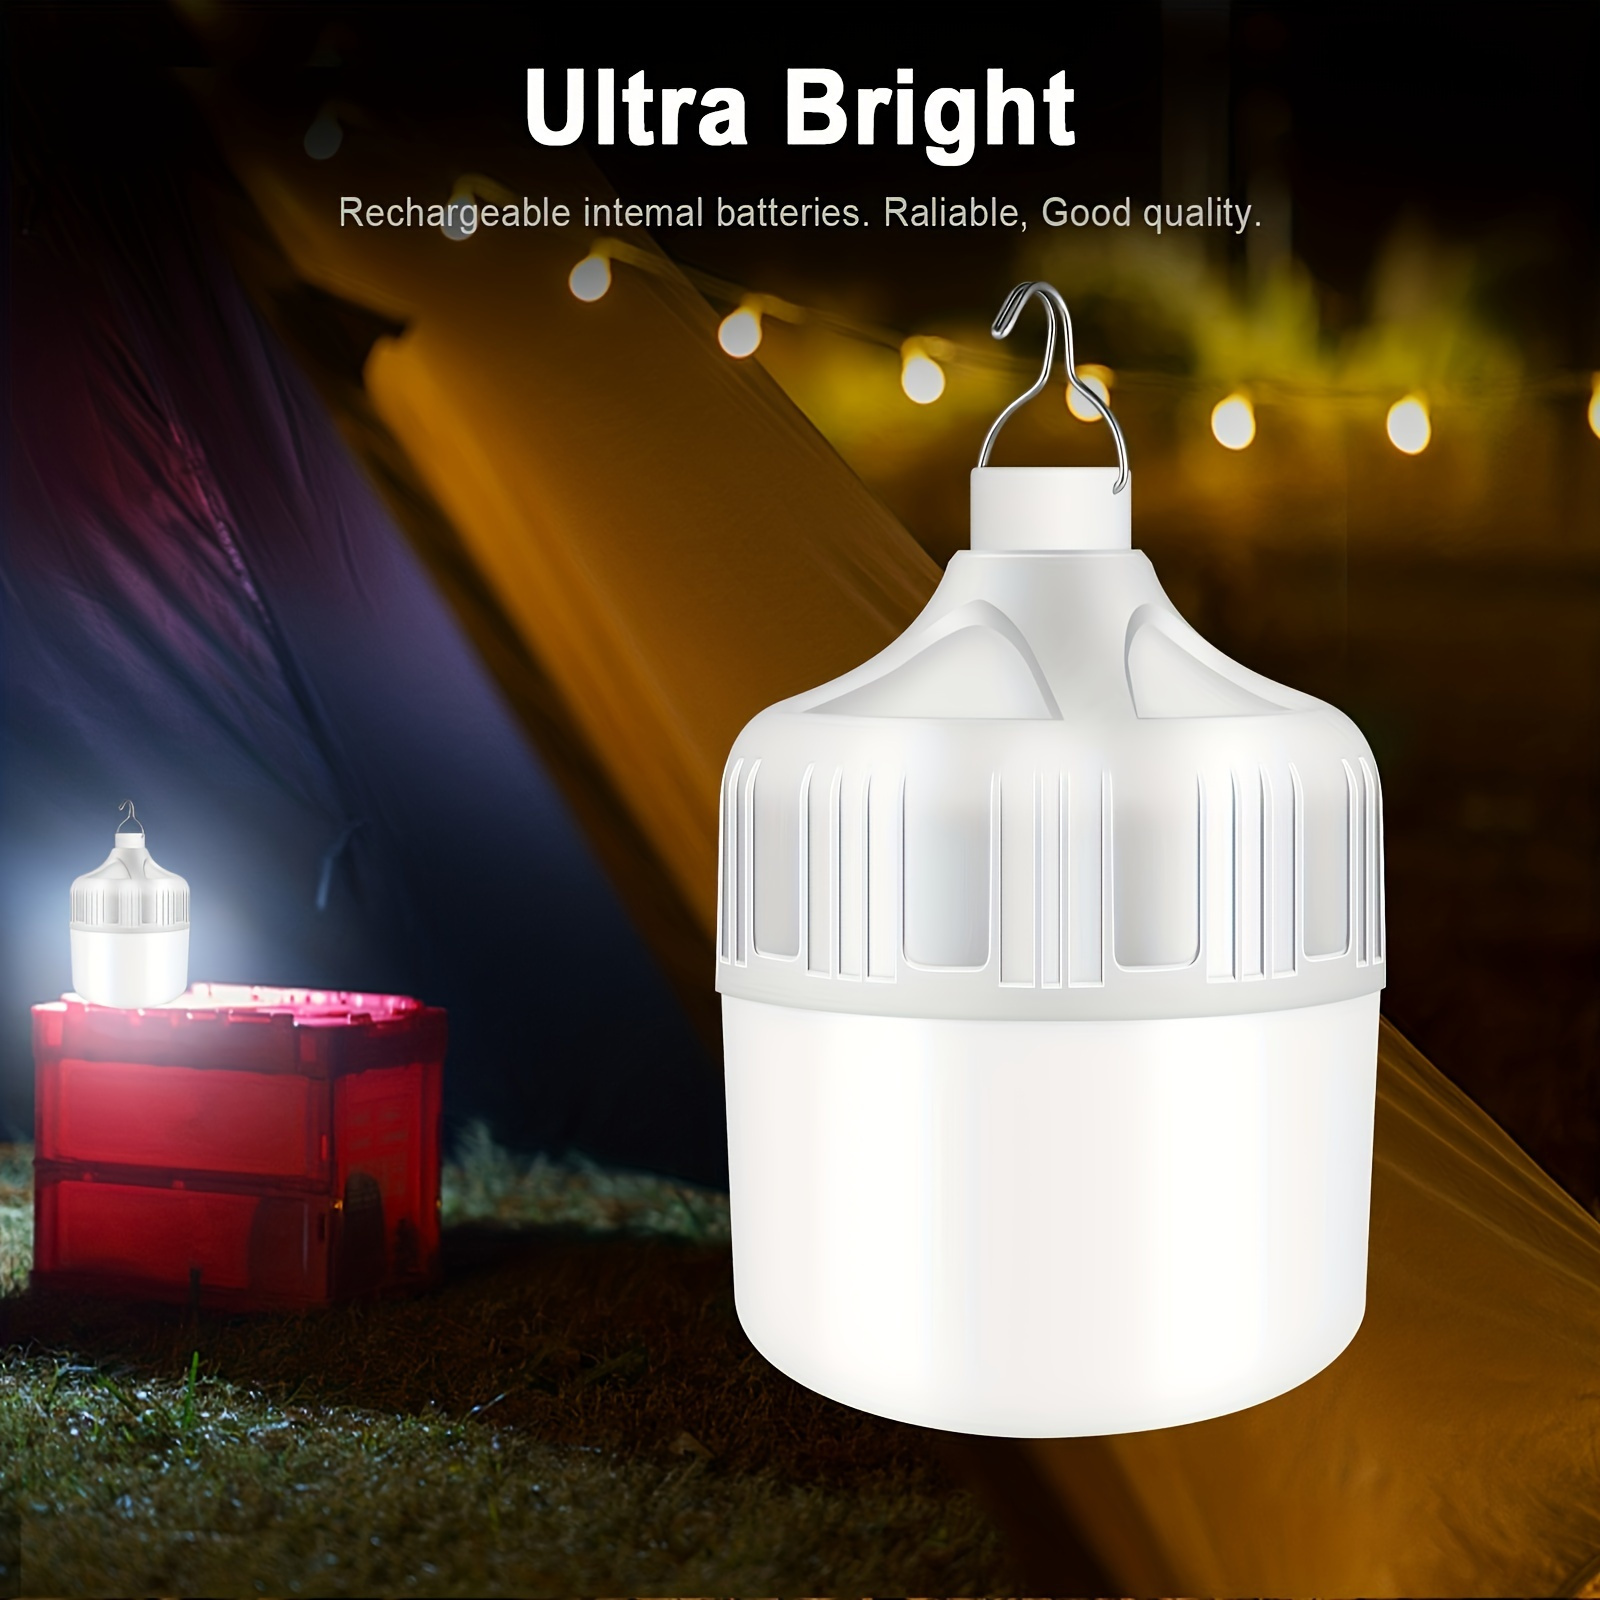 Brightz Sitebrightz LED Camping Tent Light - Magnetically Clips on Tent Edges - USB Rechargeable Camping Lights for Tent Lights for Camping - LED